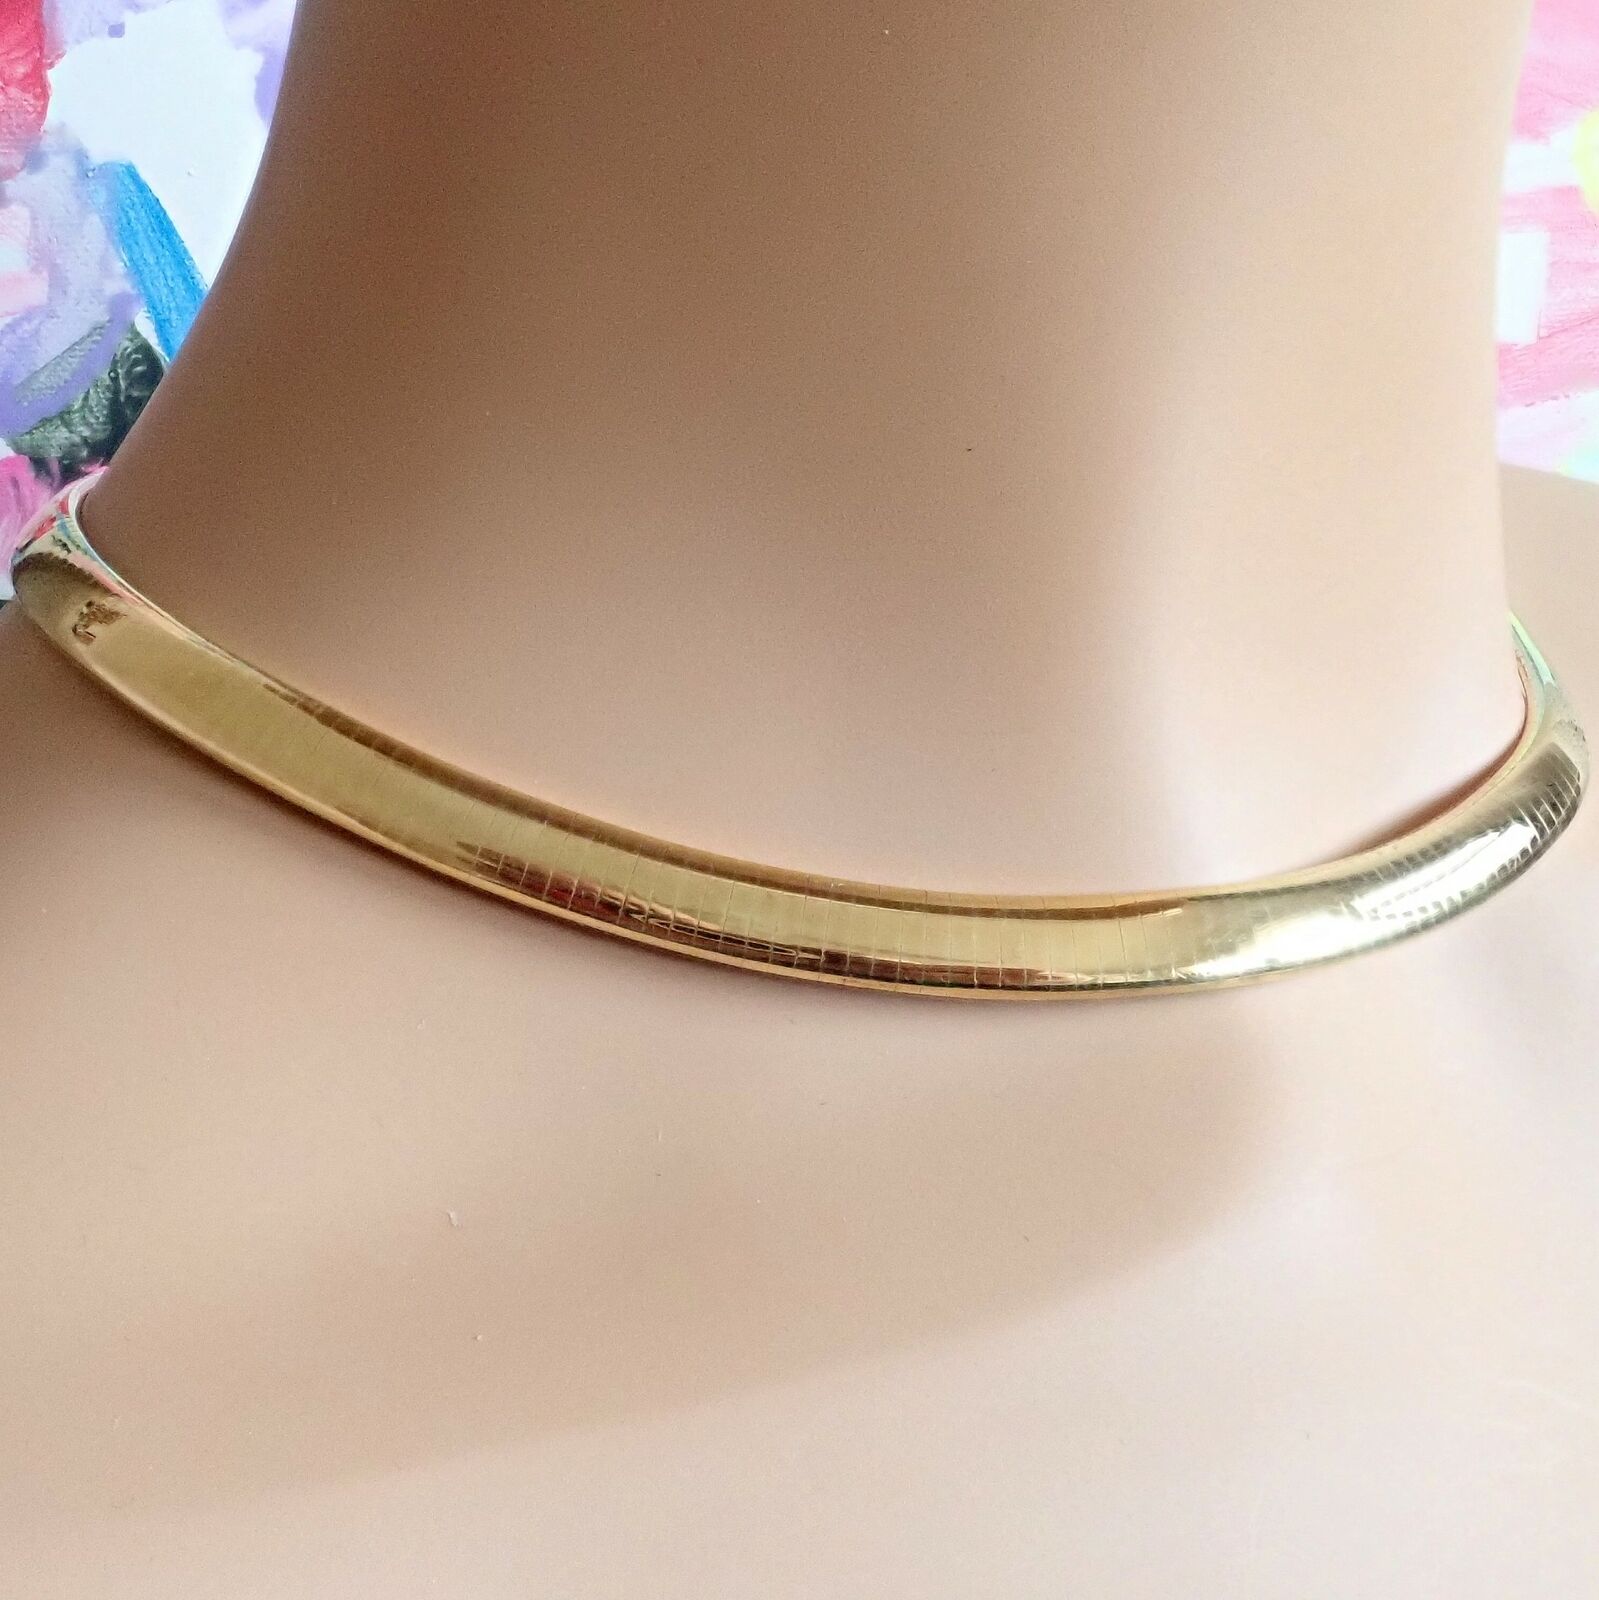 Van Cleef & Arpels Jewelry & Watches:Fine Jewelry:Necklaces & Pendants Rare! Authentic Van Cleef & Arpels 18k Yellow Gold Snake Collar Chain Necklace